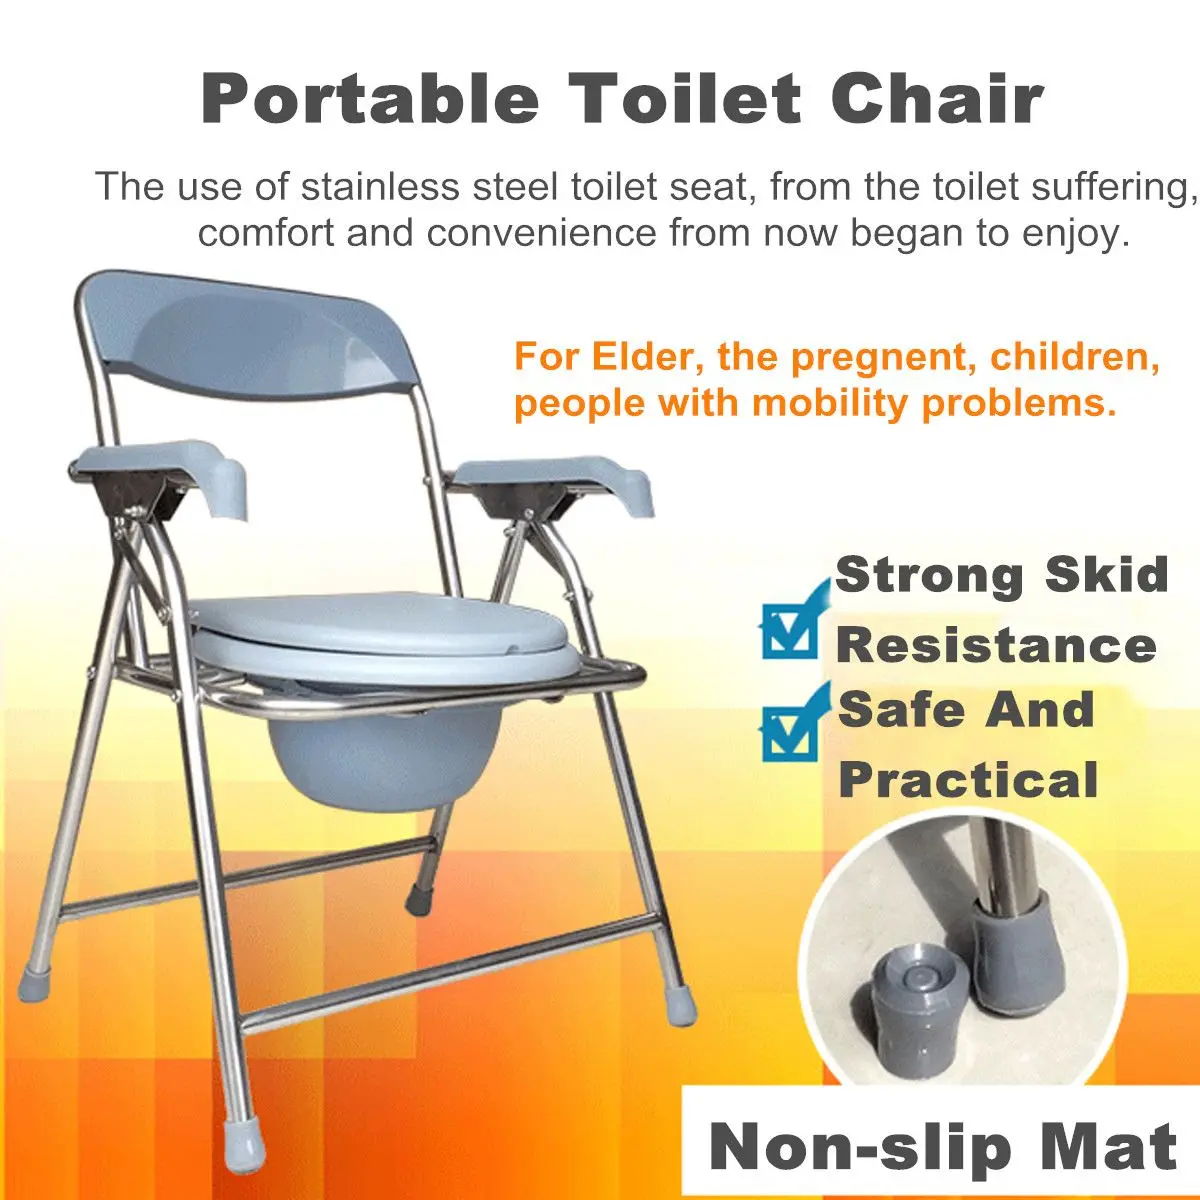 Folding Bedside Commode Chair Heavy Duty Commode Toilet Chair Toilet Safety Medical Commode Old Man Pregnant Woman Toilet Chair Bathroom Chairs Stools Aliexpress